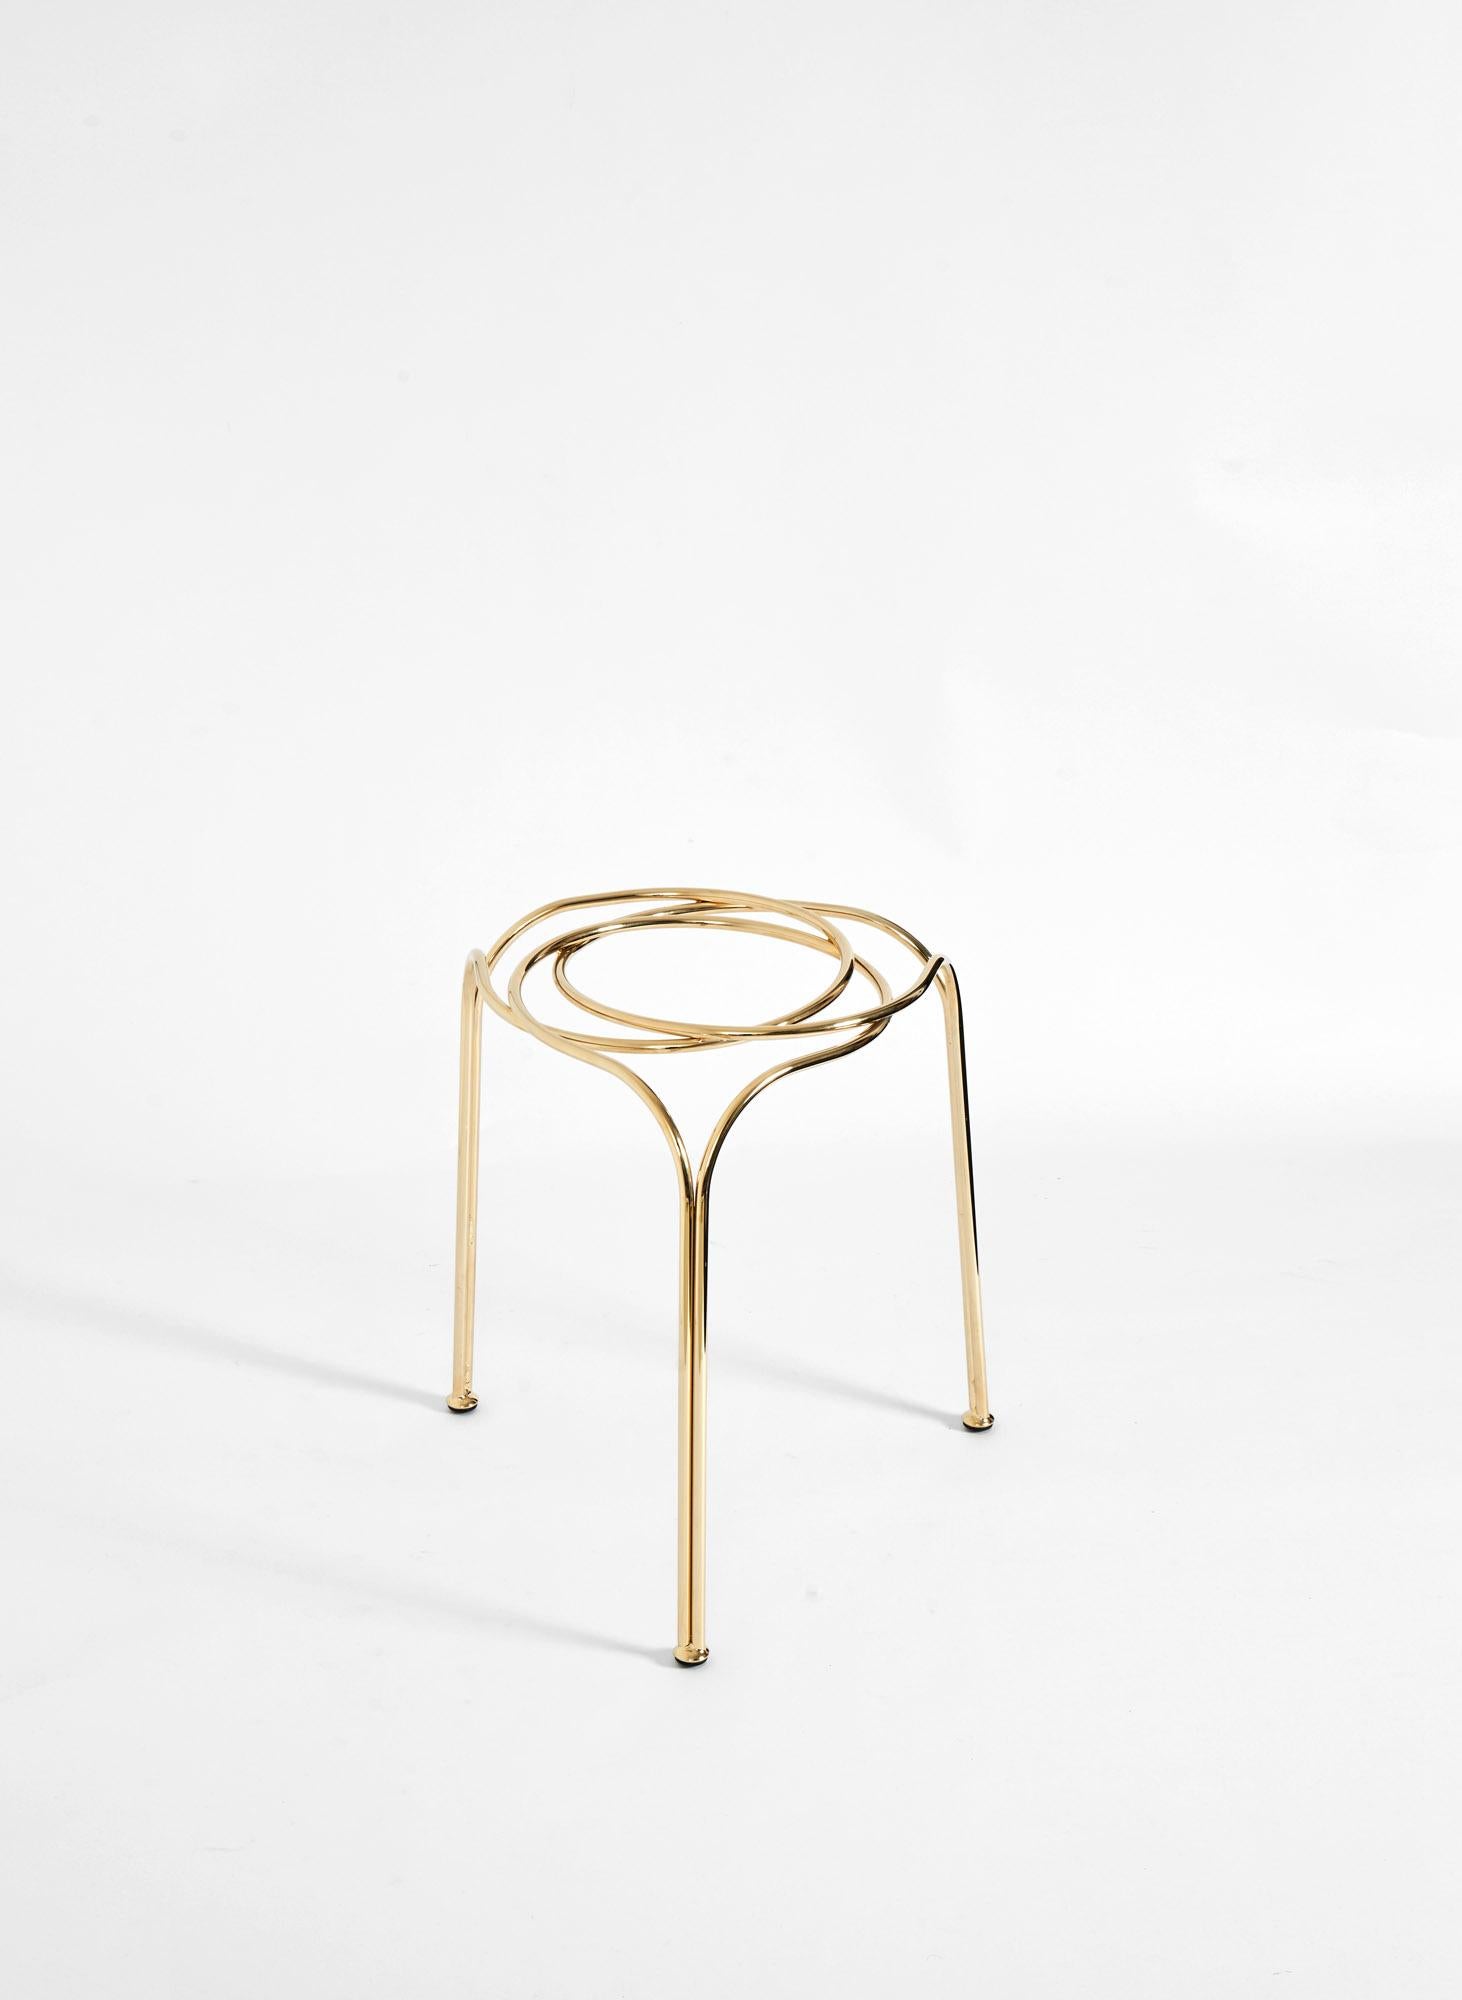 An element, a metal wire that is the stretch that draws a circle in space. Three elements, three circles, integrate and inerpenetrate in a geometric game creating an unexpectedly solid object.
Flow stool or sculpture, by Enrico Girotti, is